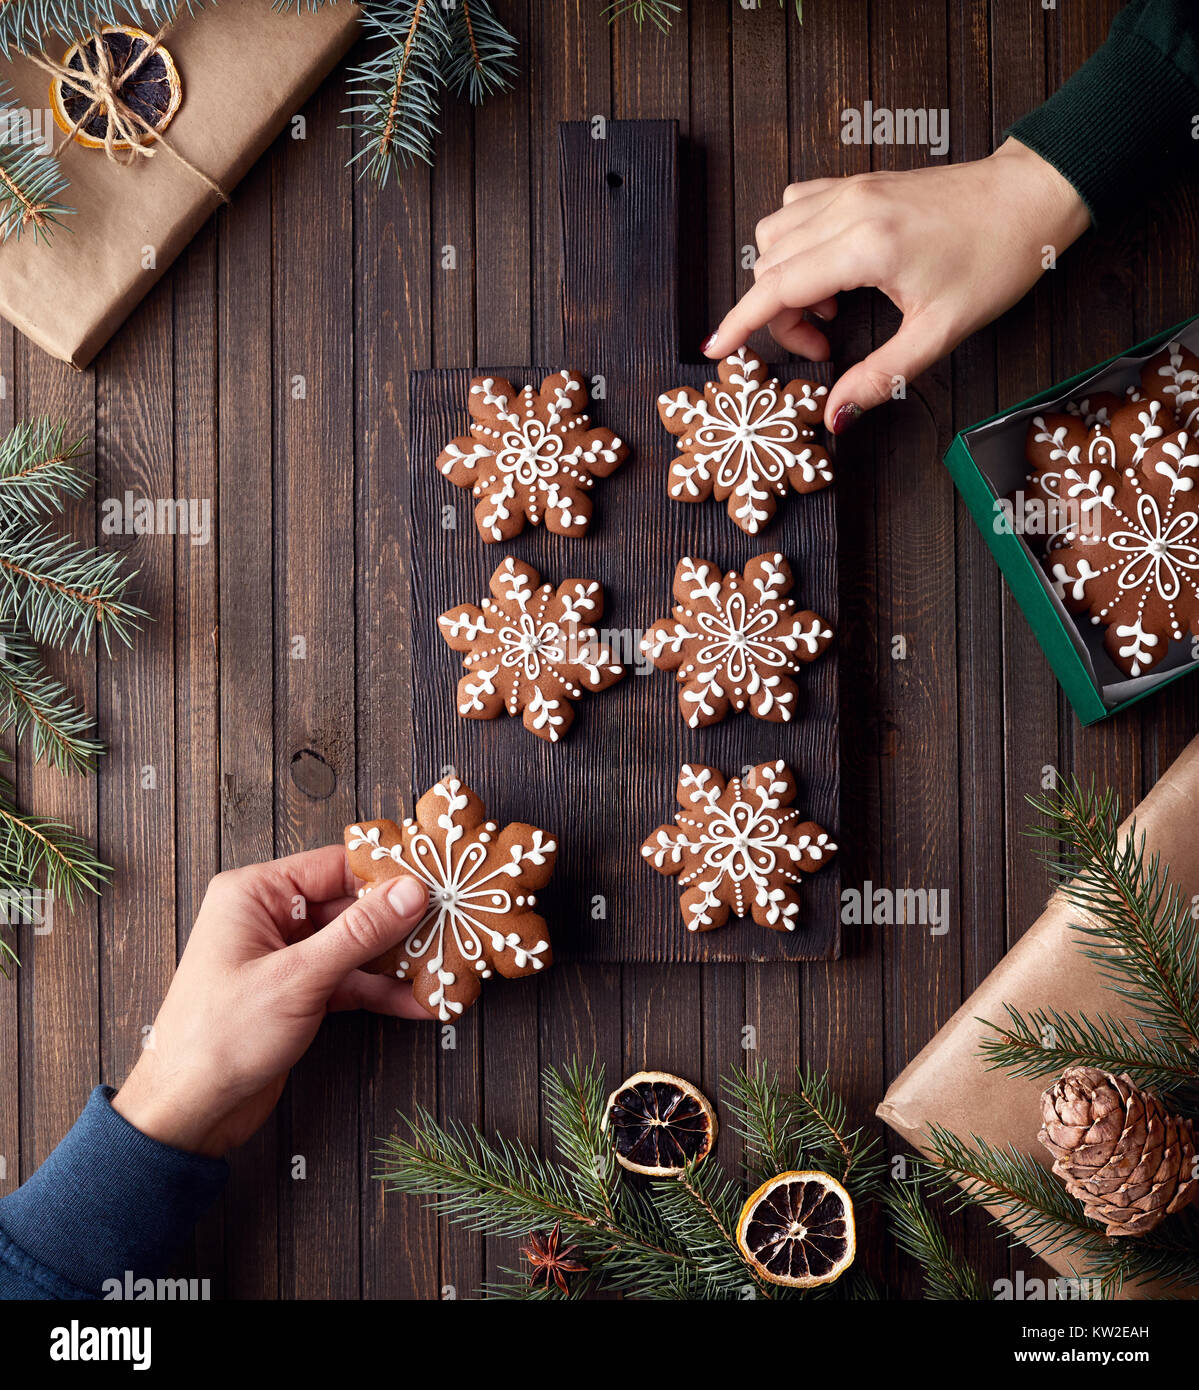 Man and woman holding Christmas gingerbread stars on rustic wooden background Stock Photo